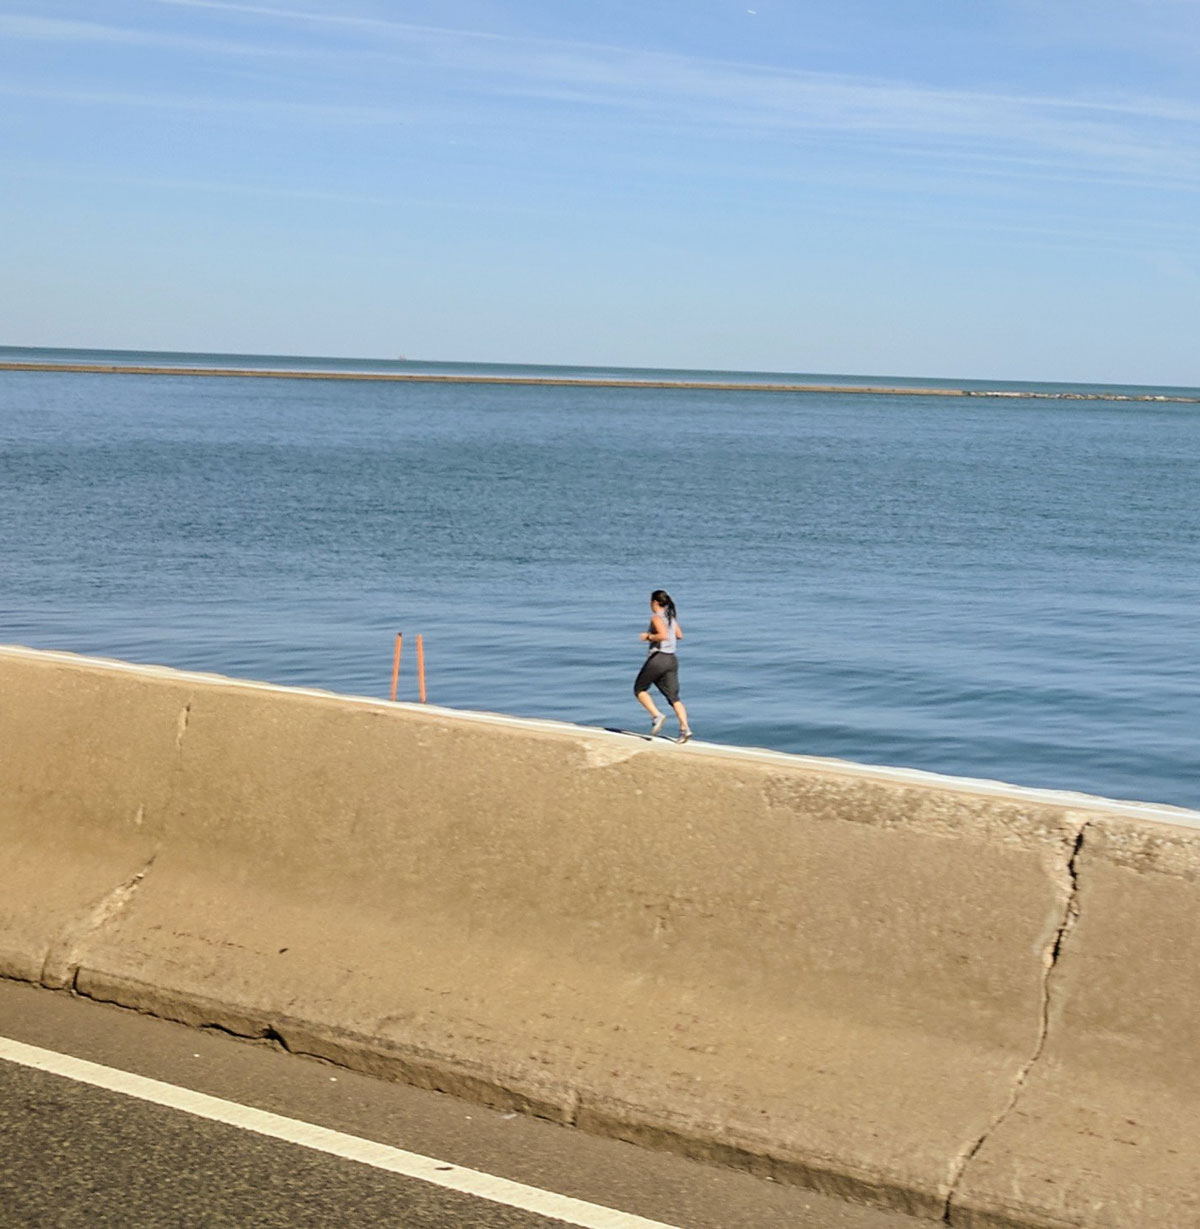 Tiny jogger spotted on freeway barrier